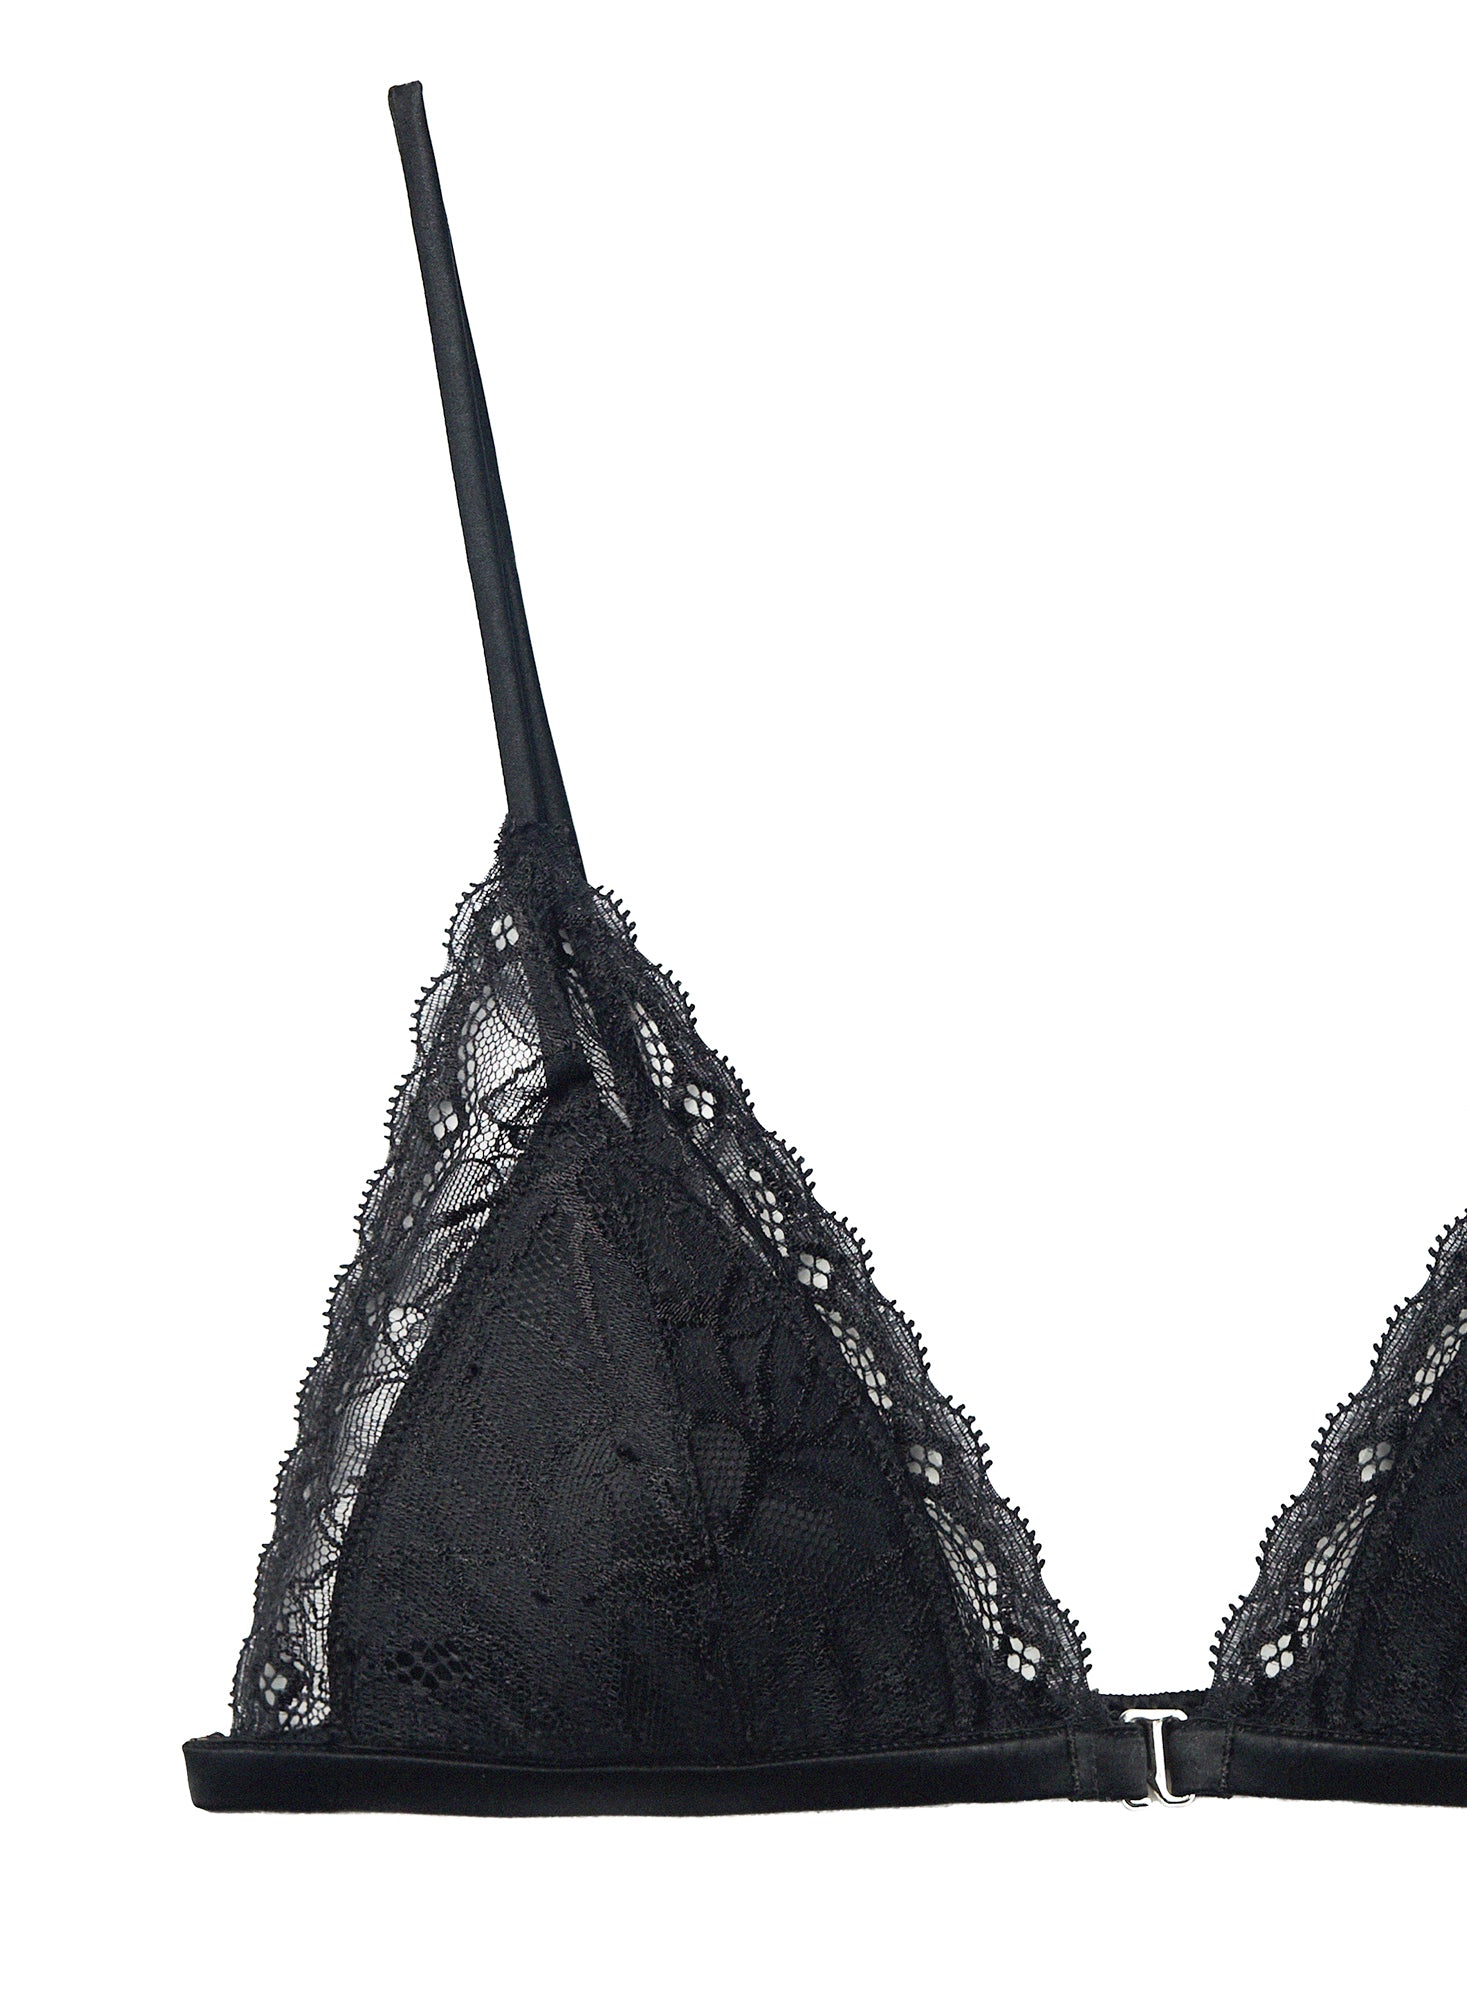 Triangle bra without underwire in microfibre Black Oh My Dim's